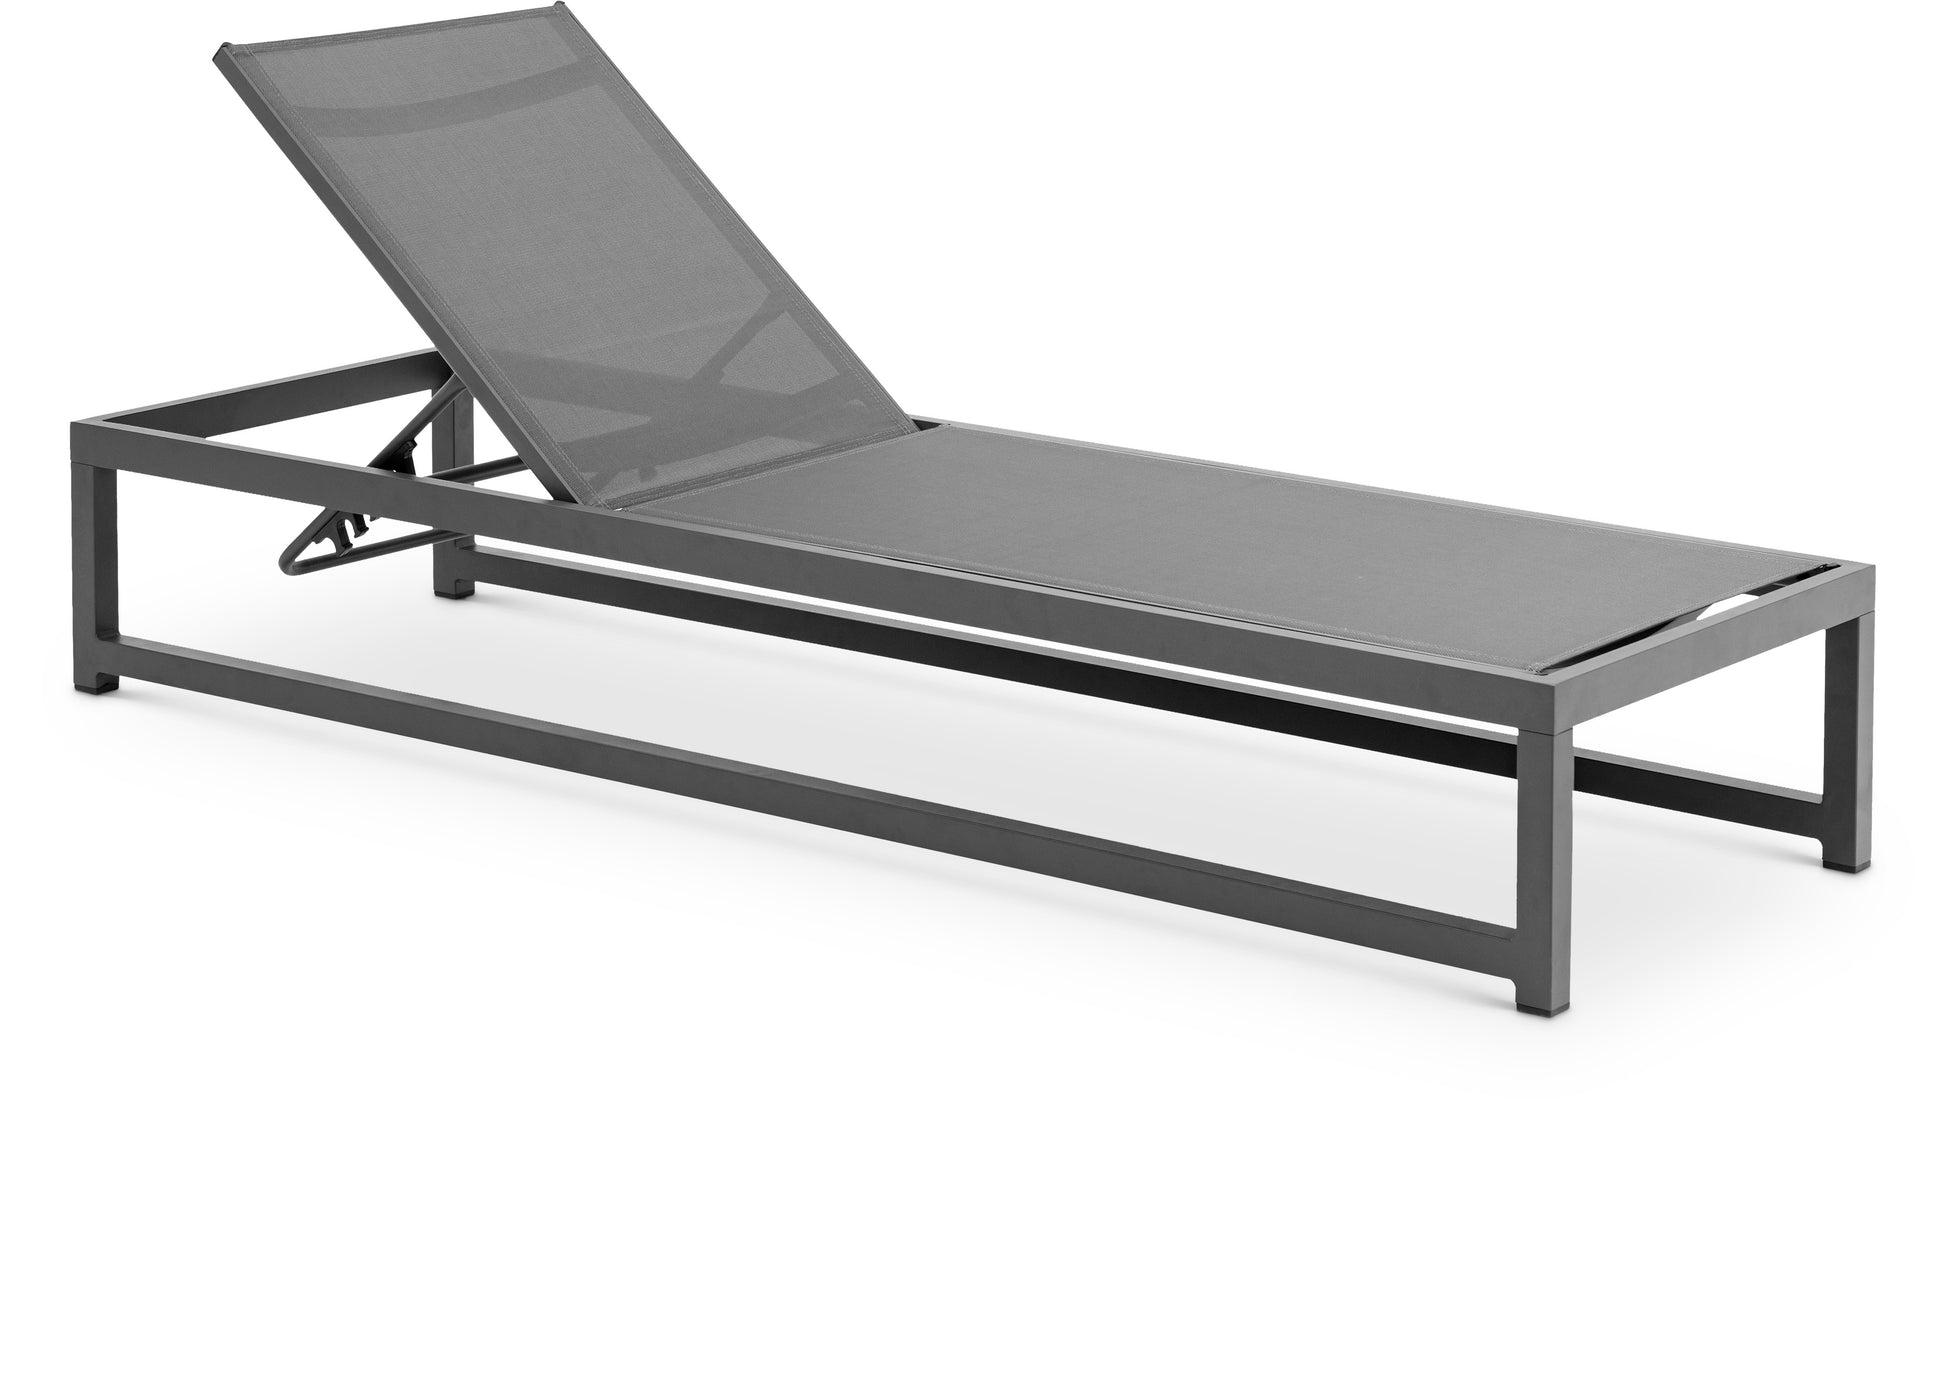 Outdoor Patio Adjustable Sun Chaise Lounge Chair